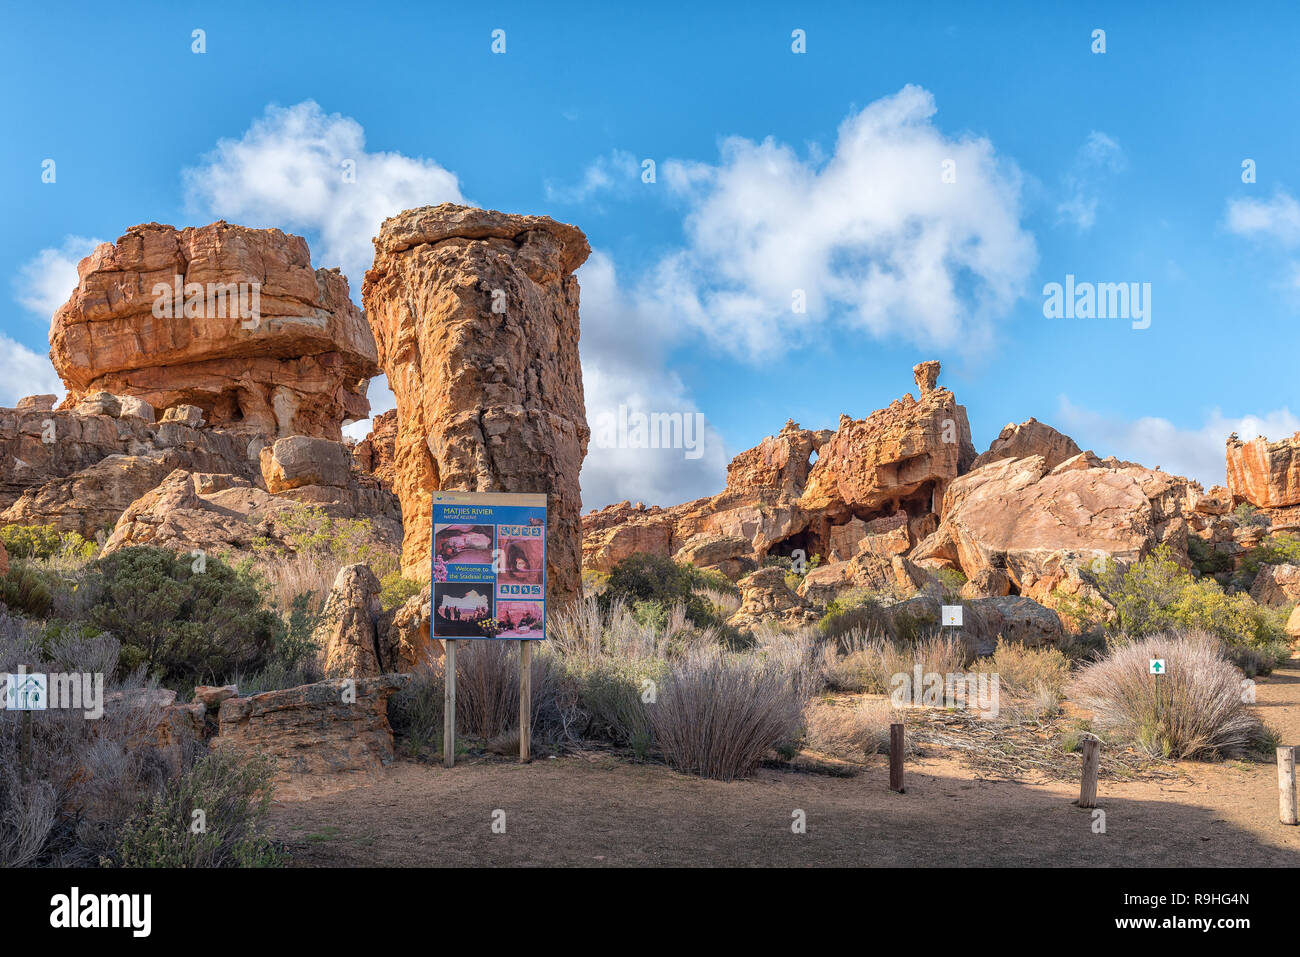 STADSAAL CAVES, SOUTH AFRICA, AUGUST 26, 2018: Rock formations at the Stadsaal Caves in the Cederberg Mountains of the Western Cape Province. Informat Stock Photo